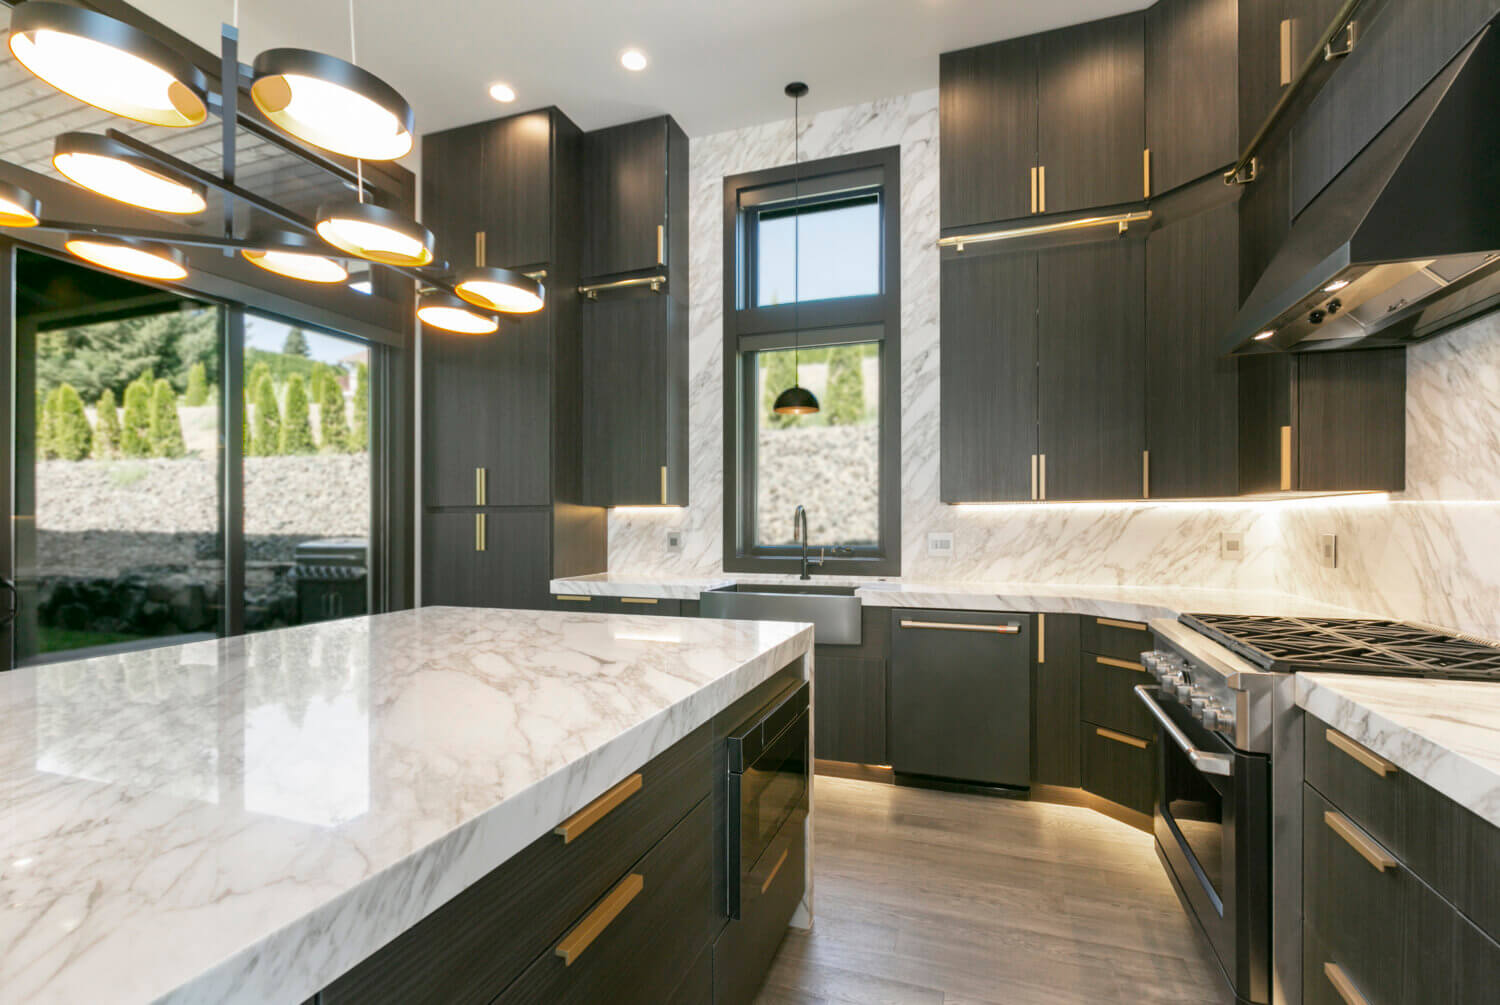 An all black kitchen with modern textured cabinets from Dura Supreme Cabinetry.